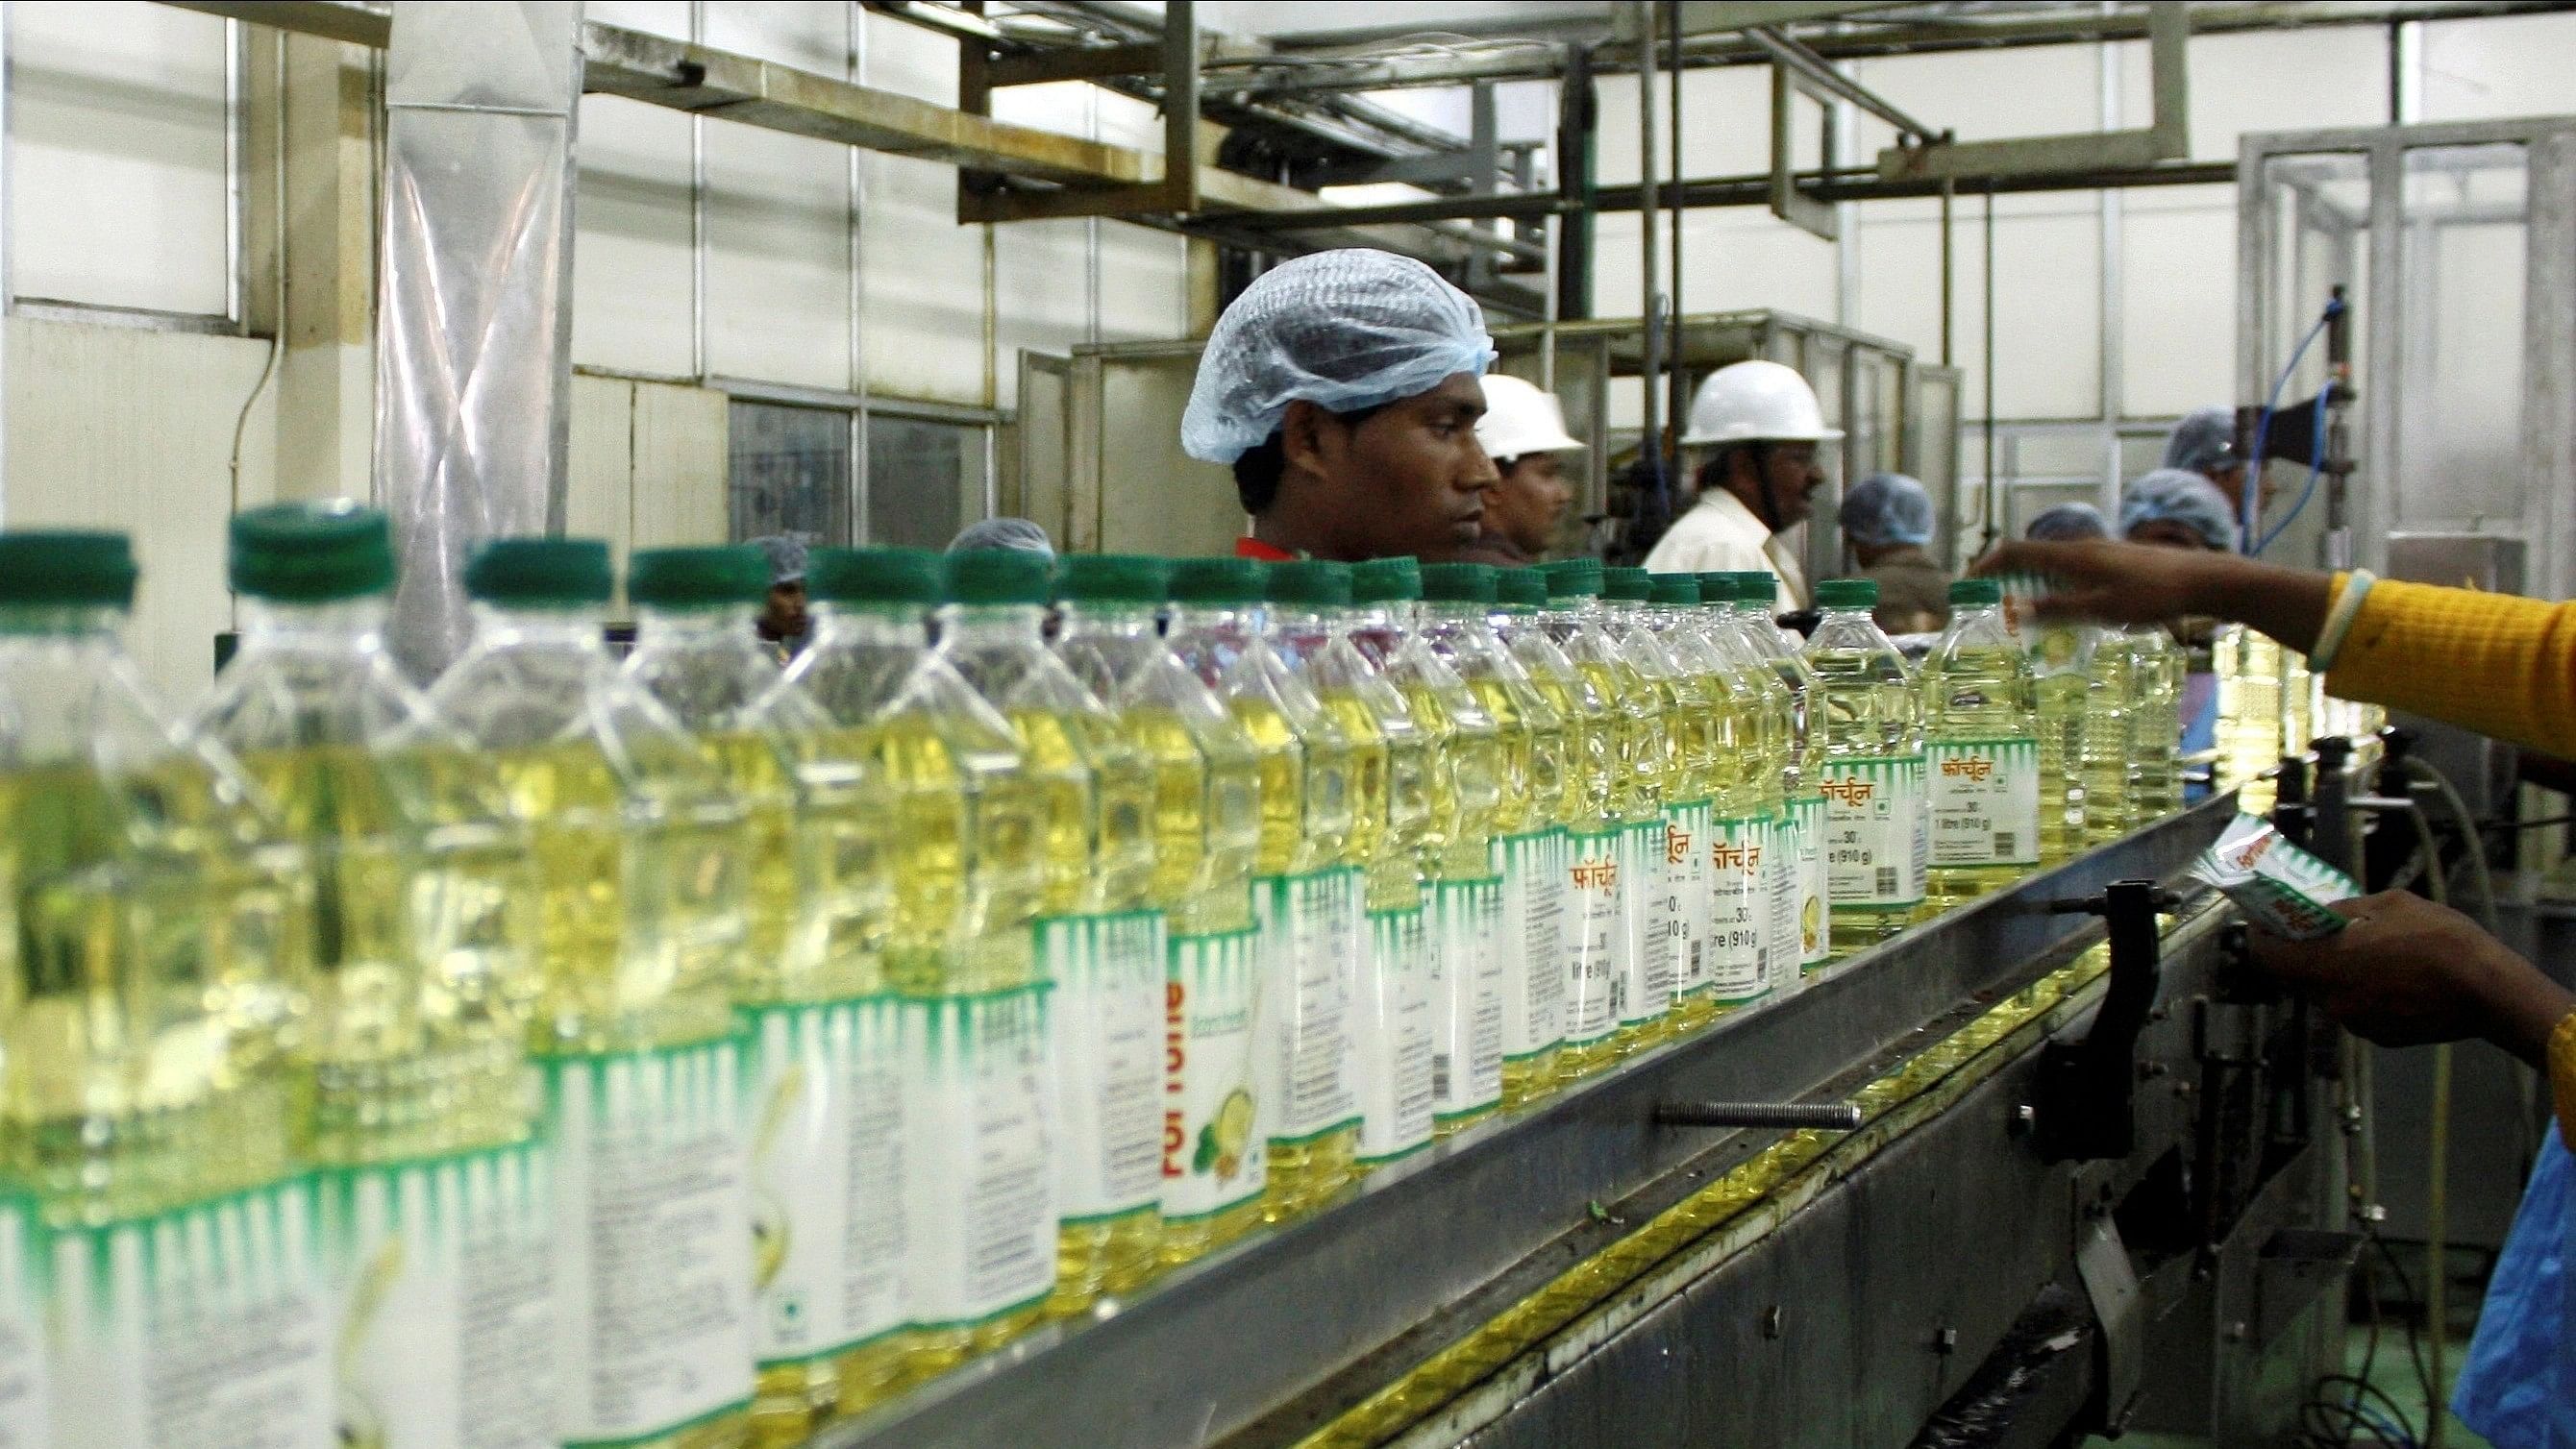 <div class="paragraphs"><p>Representative image of employees filling plastic bottles with edible oil at an oil refinery plant.</p></div>